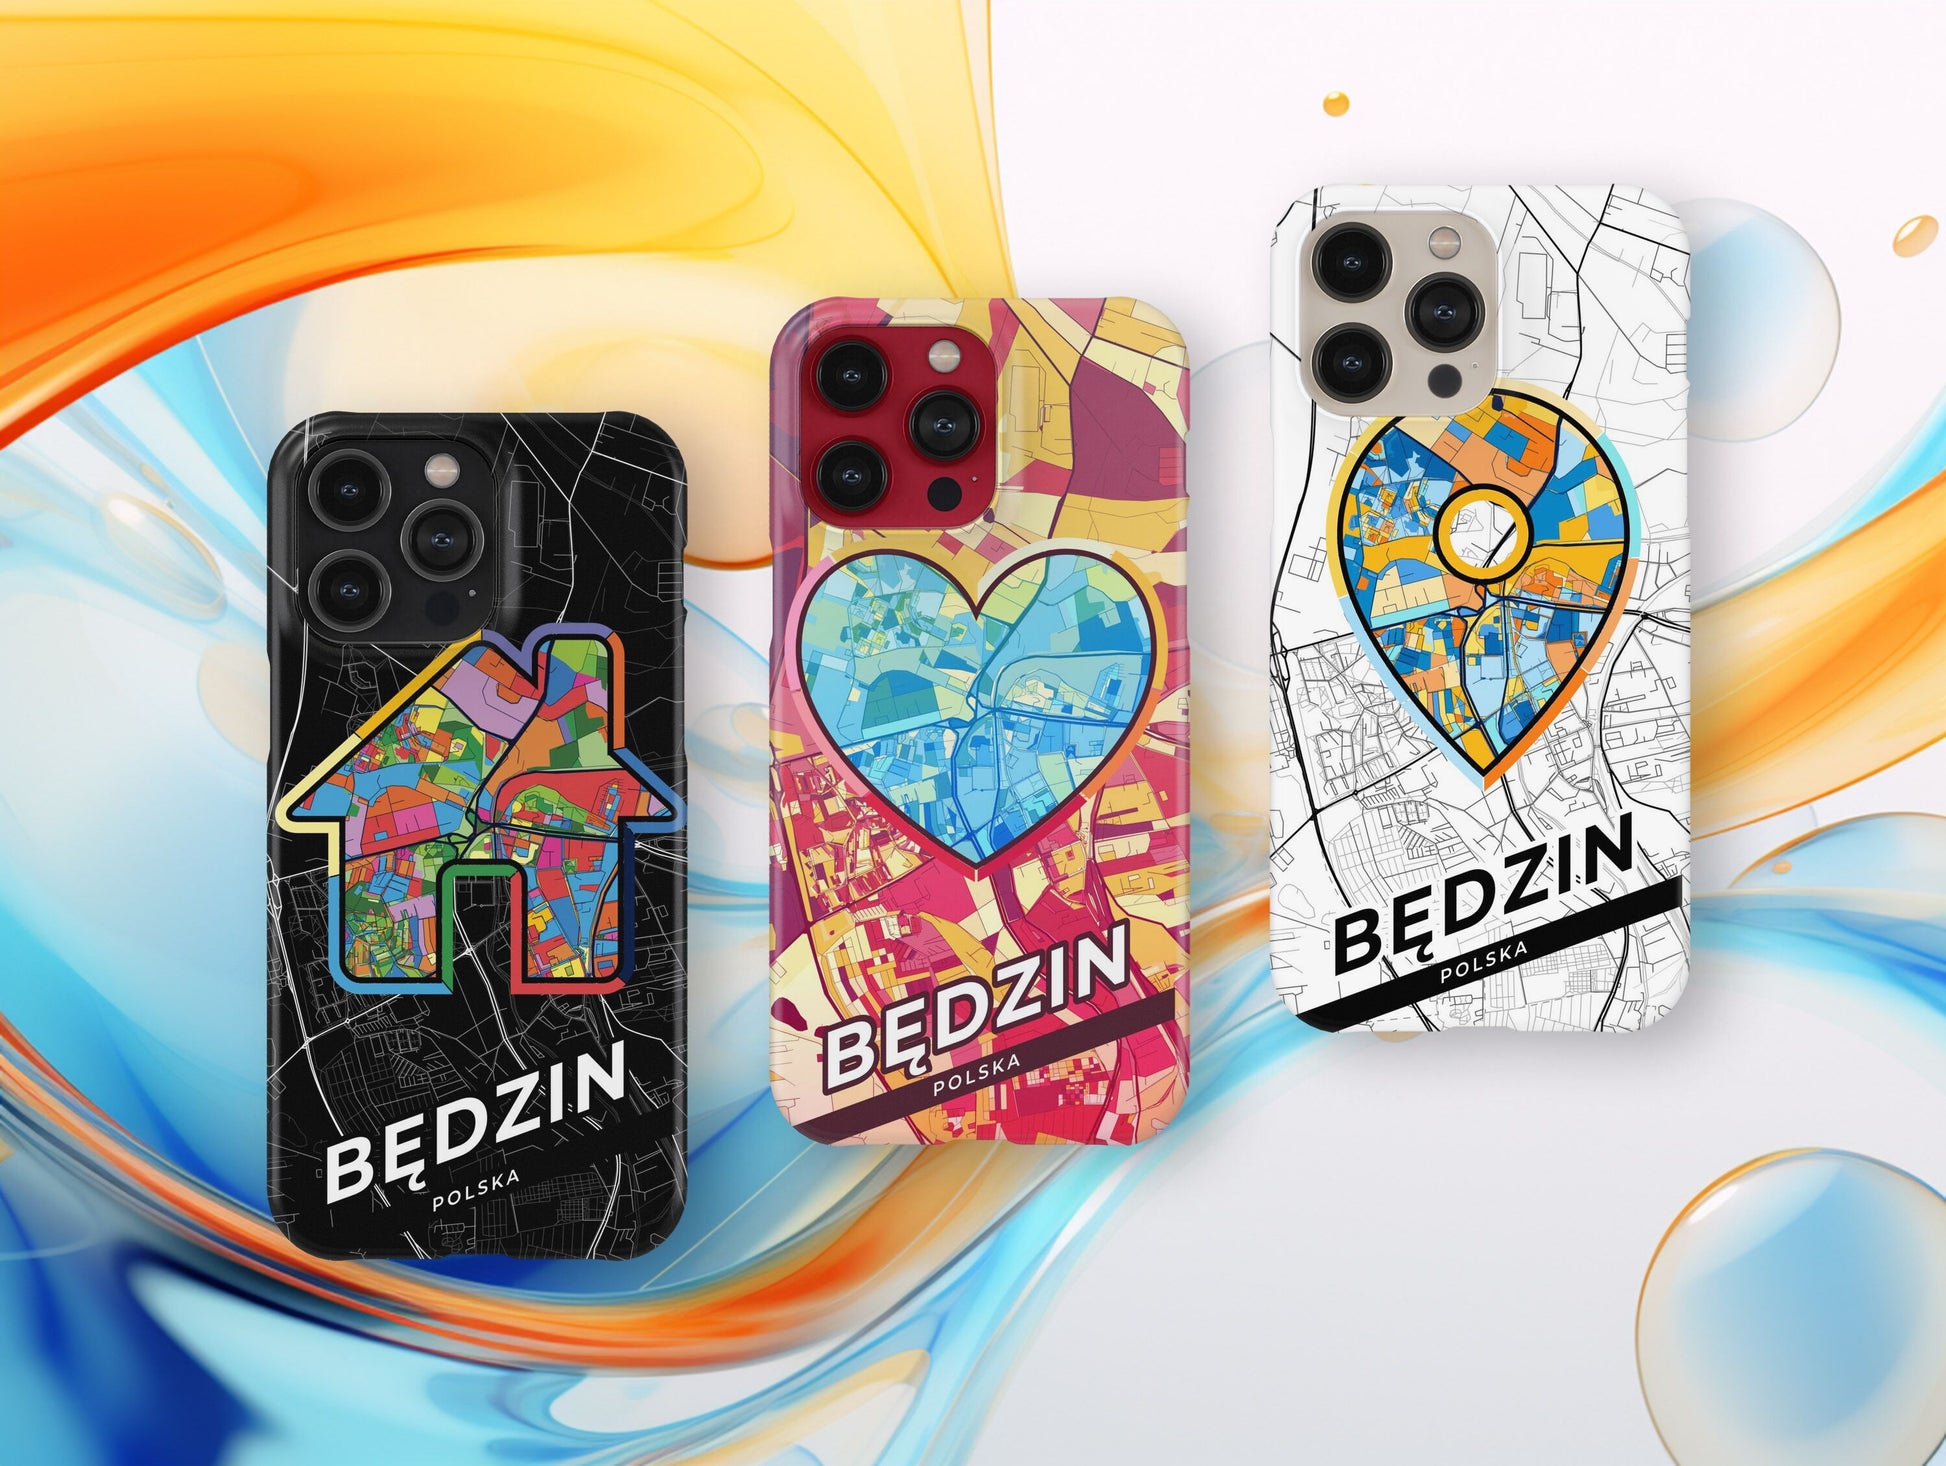 Będzin Poland slim phone case with colorful icon. Birthday, wedding or housewarming gift. Couple match cases.